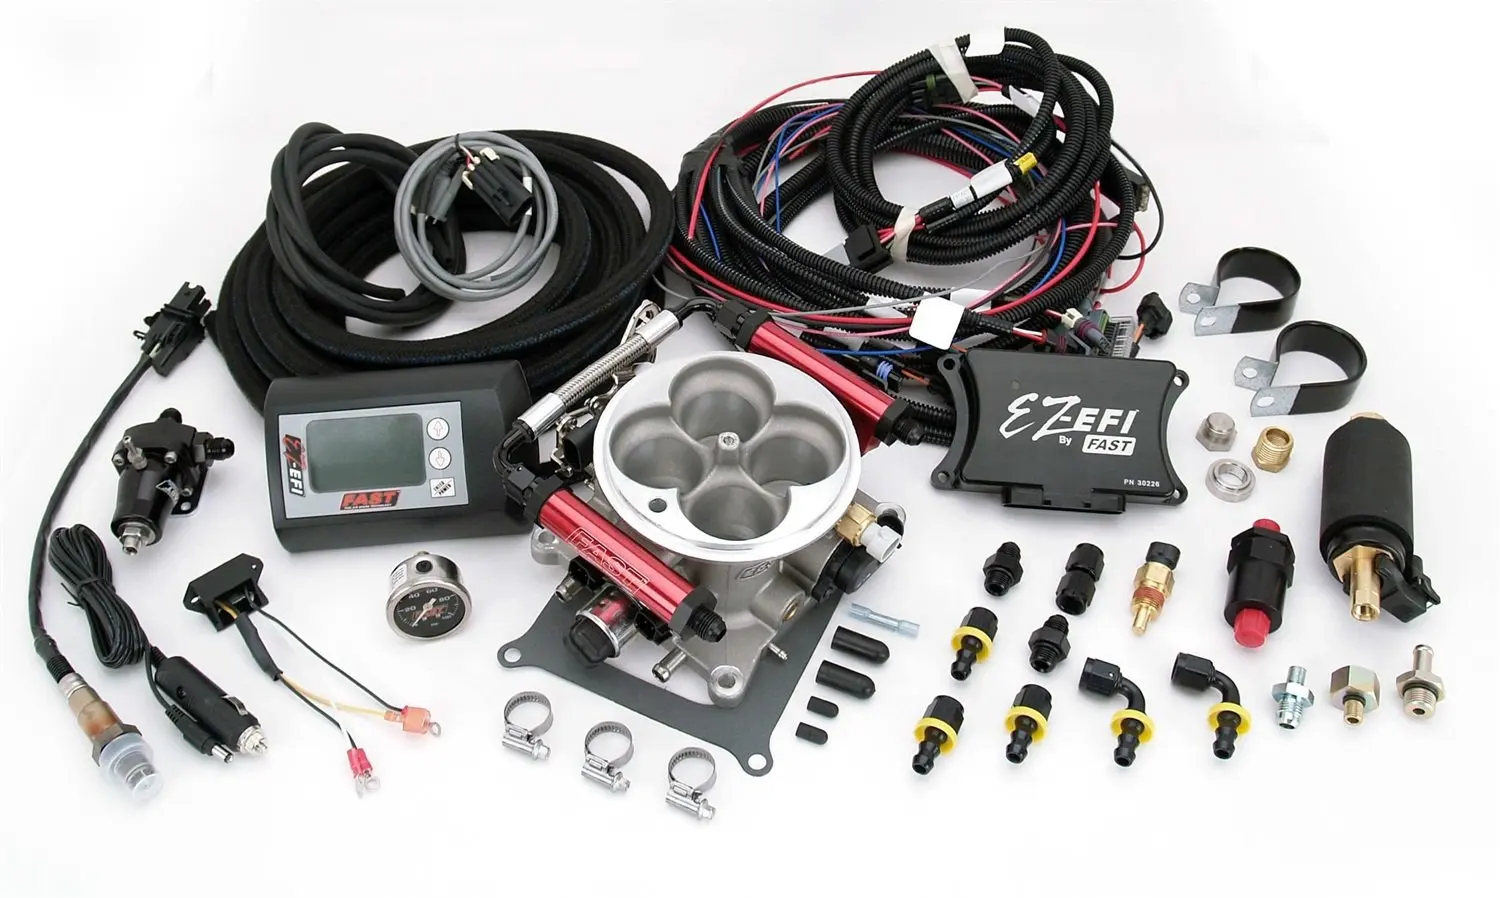 Efi system. Repair Kit for fuel line Corvette 2015. Fuel System Tune up Kit это. Electronic fuel Injection. Throttle Tuning Noble v6.